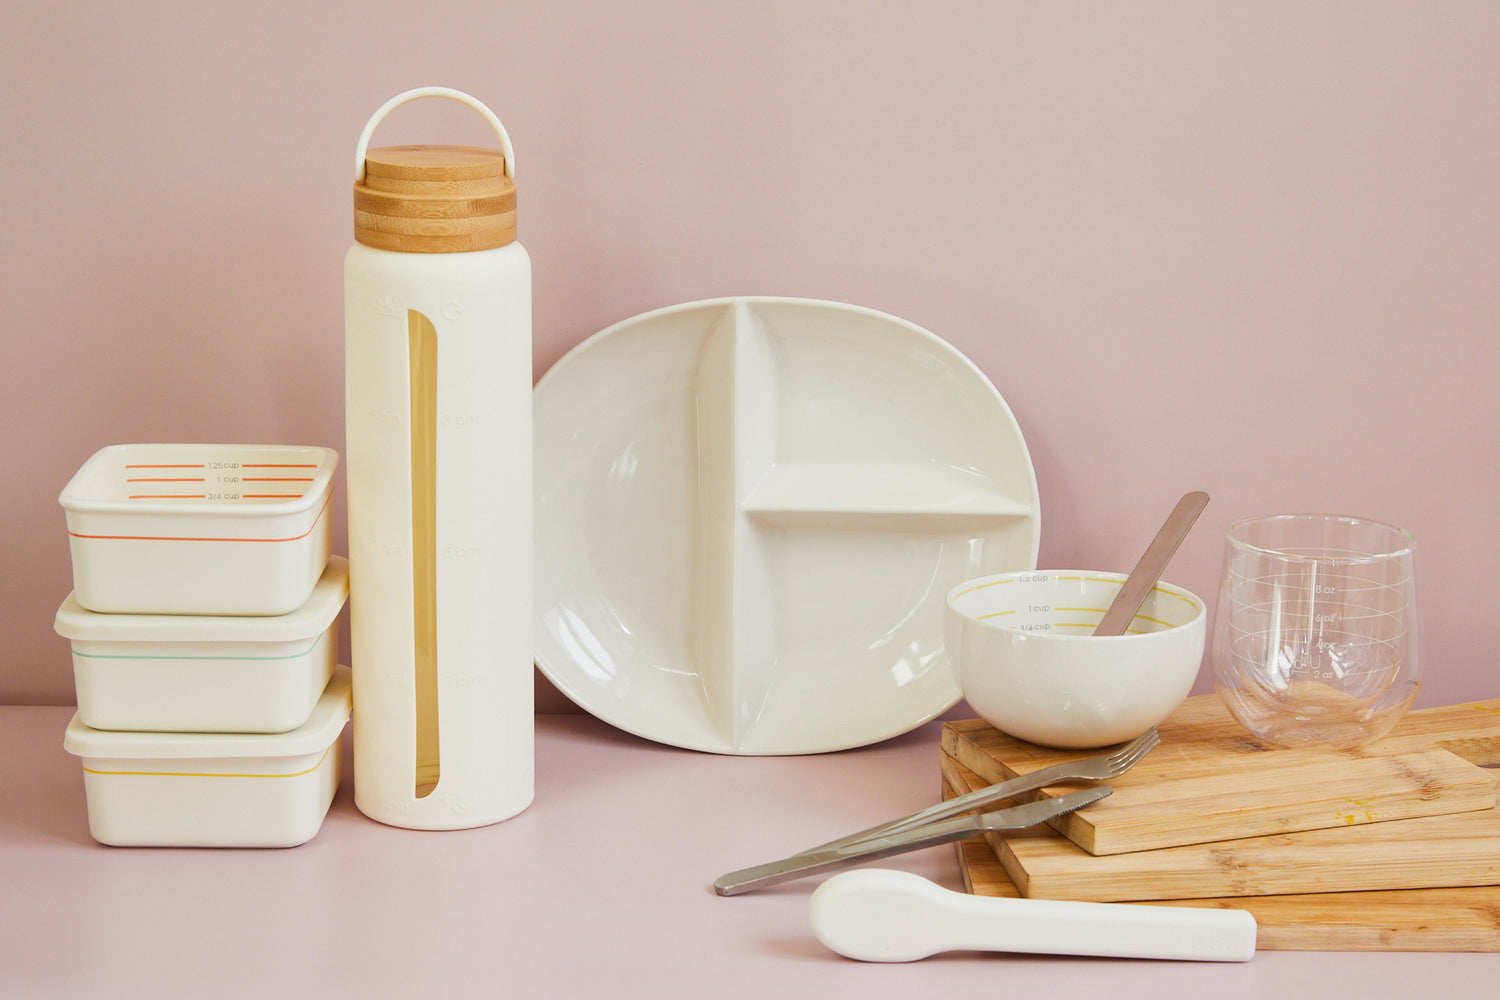 product photography with portion control tools: 3 containers stacked, 1 water bottle, 1 portion plate, 1 bowl with a spoon inside, fork and knife laying over 3 stacked cutting boards and a glass on top of the boards